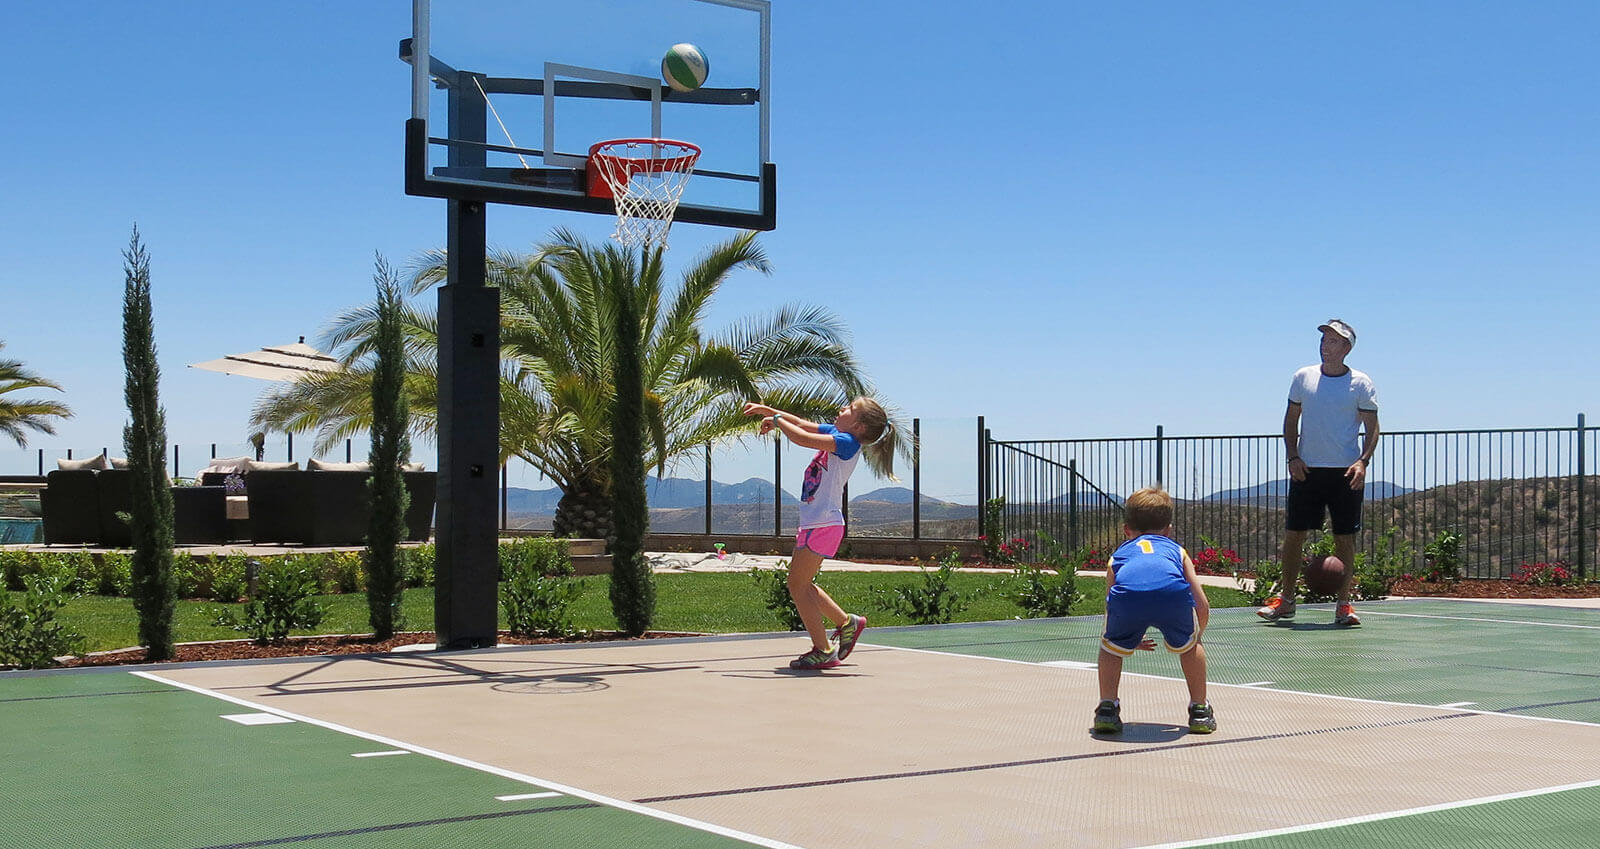 A family is playing basketball on their backyard court.